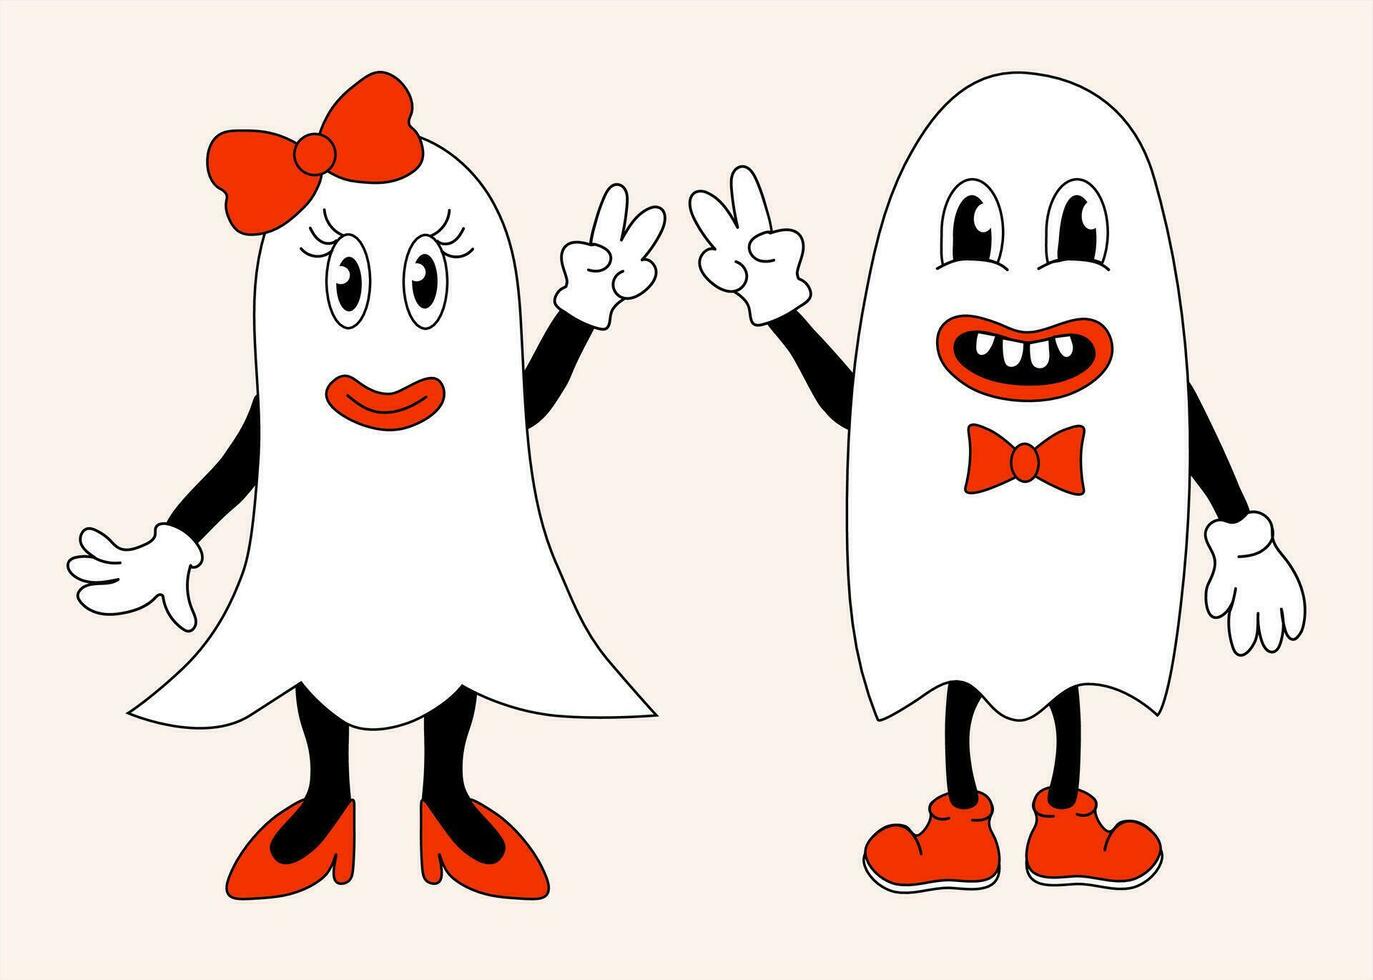 Retro 70s 60s 80s Hippie Groovy Halloween Ghosts girl and boy show the peace sign. Vector flat illustration.